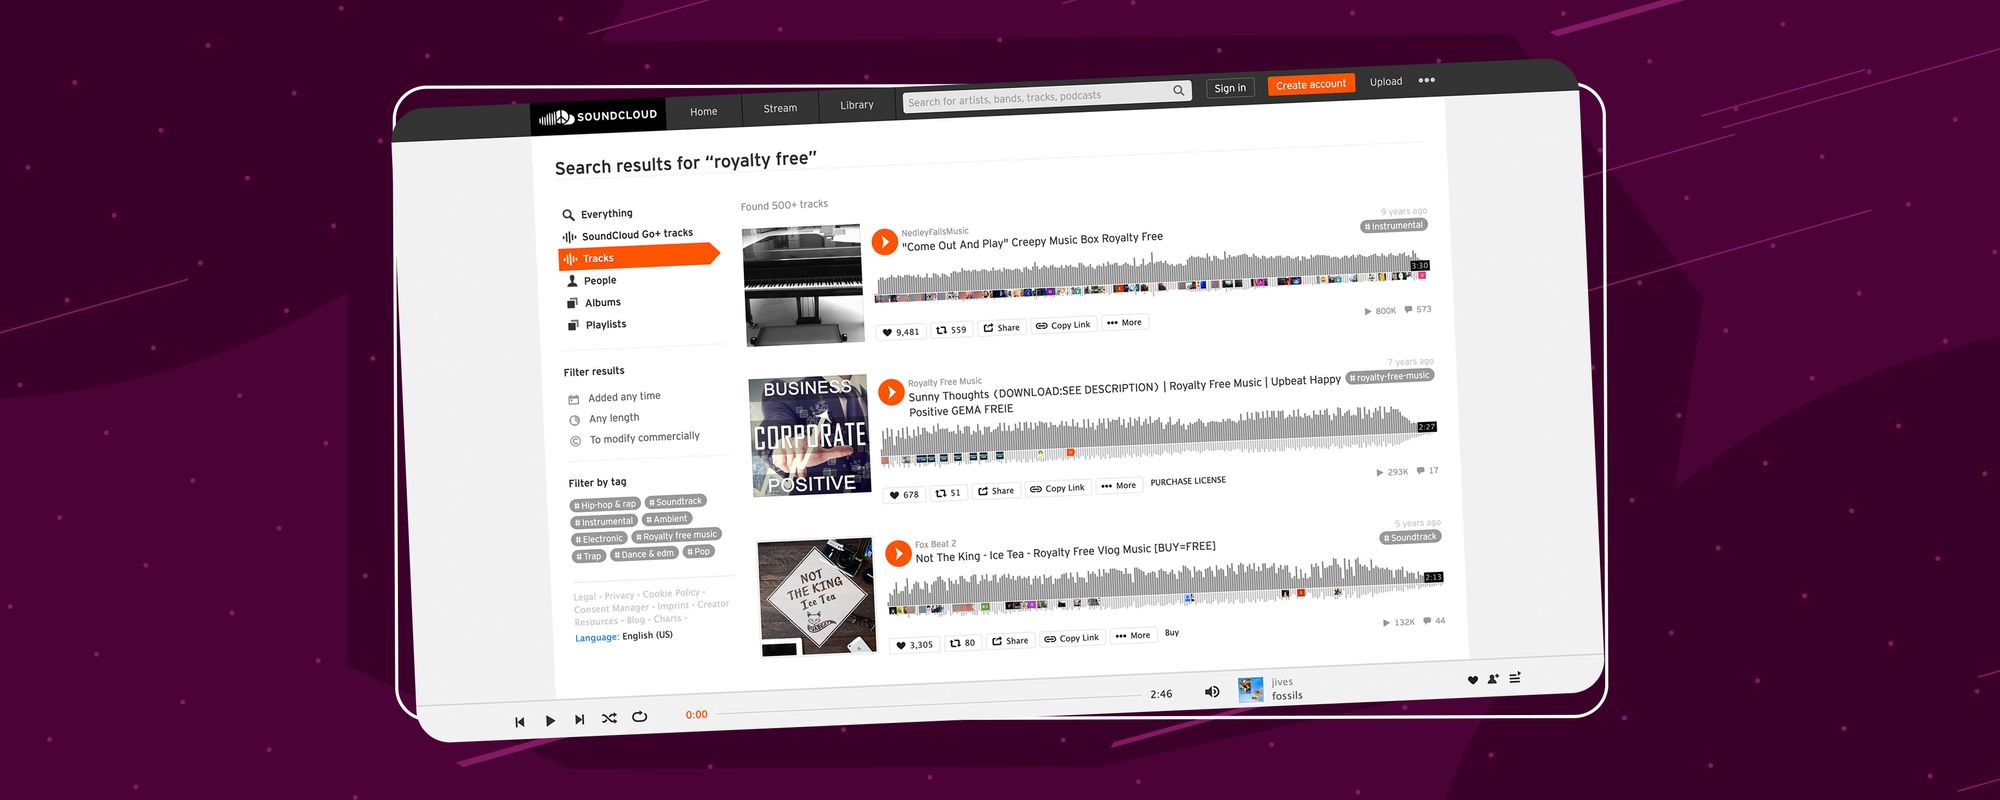 Search results for royalty-free music on Soundcloud